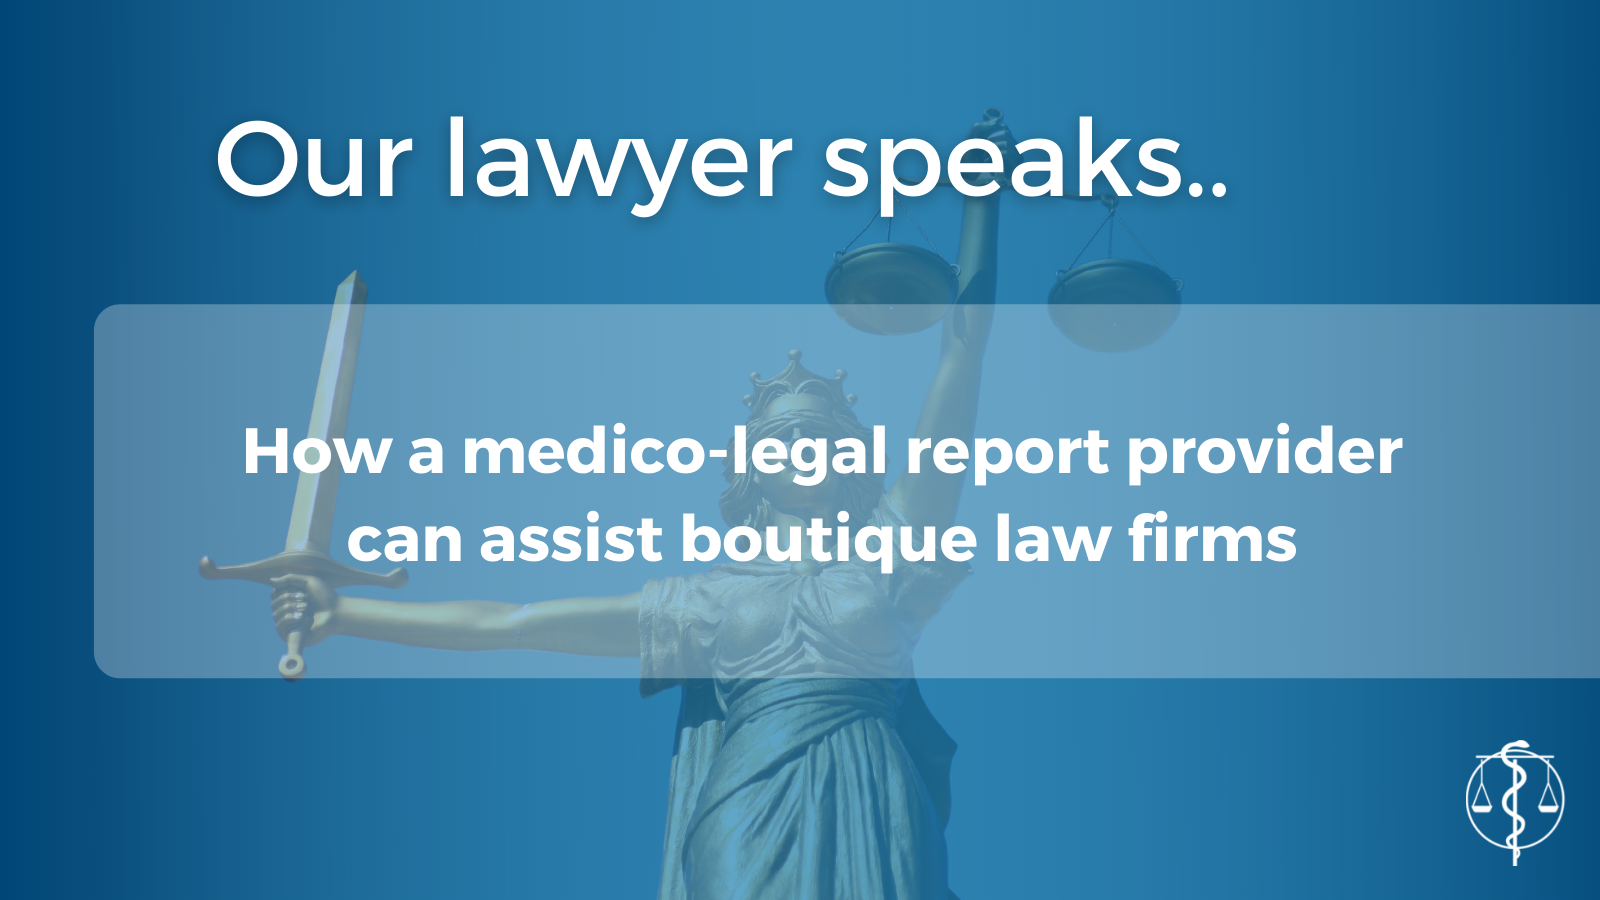 How a medico-legal provider can assist boutique law firms